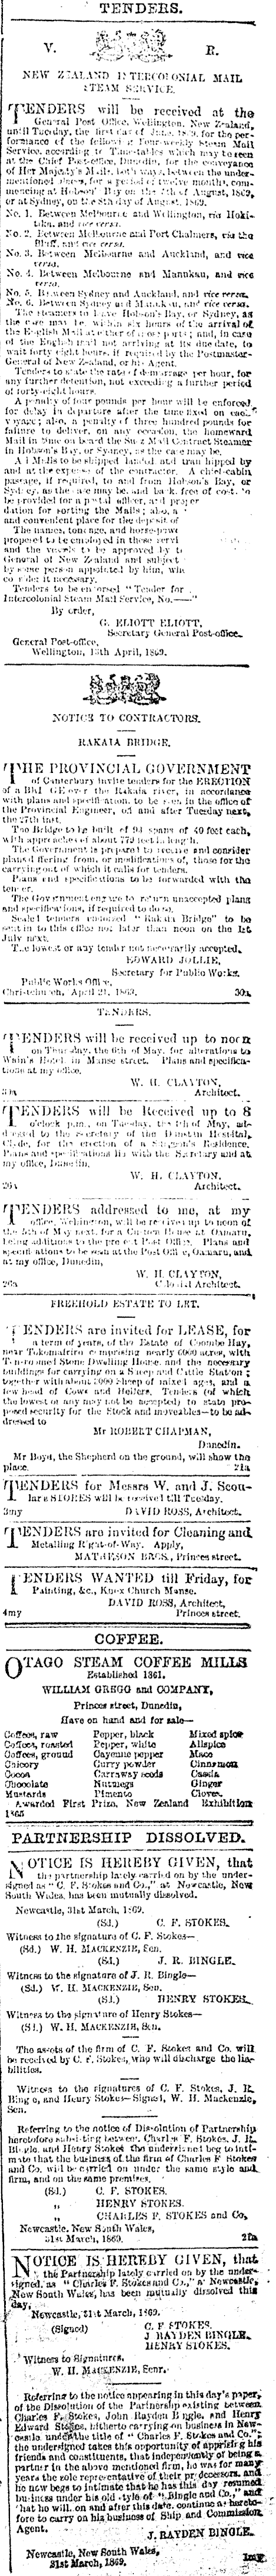 Papers Past Newspapers Otago Daily Times 4 May 1869 Page 3 Advertisements Column 2